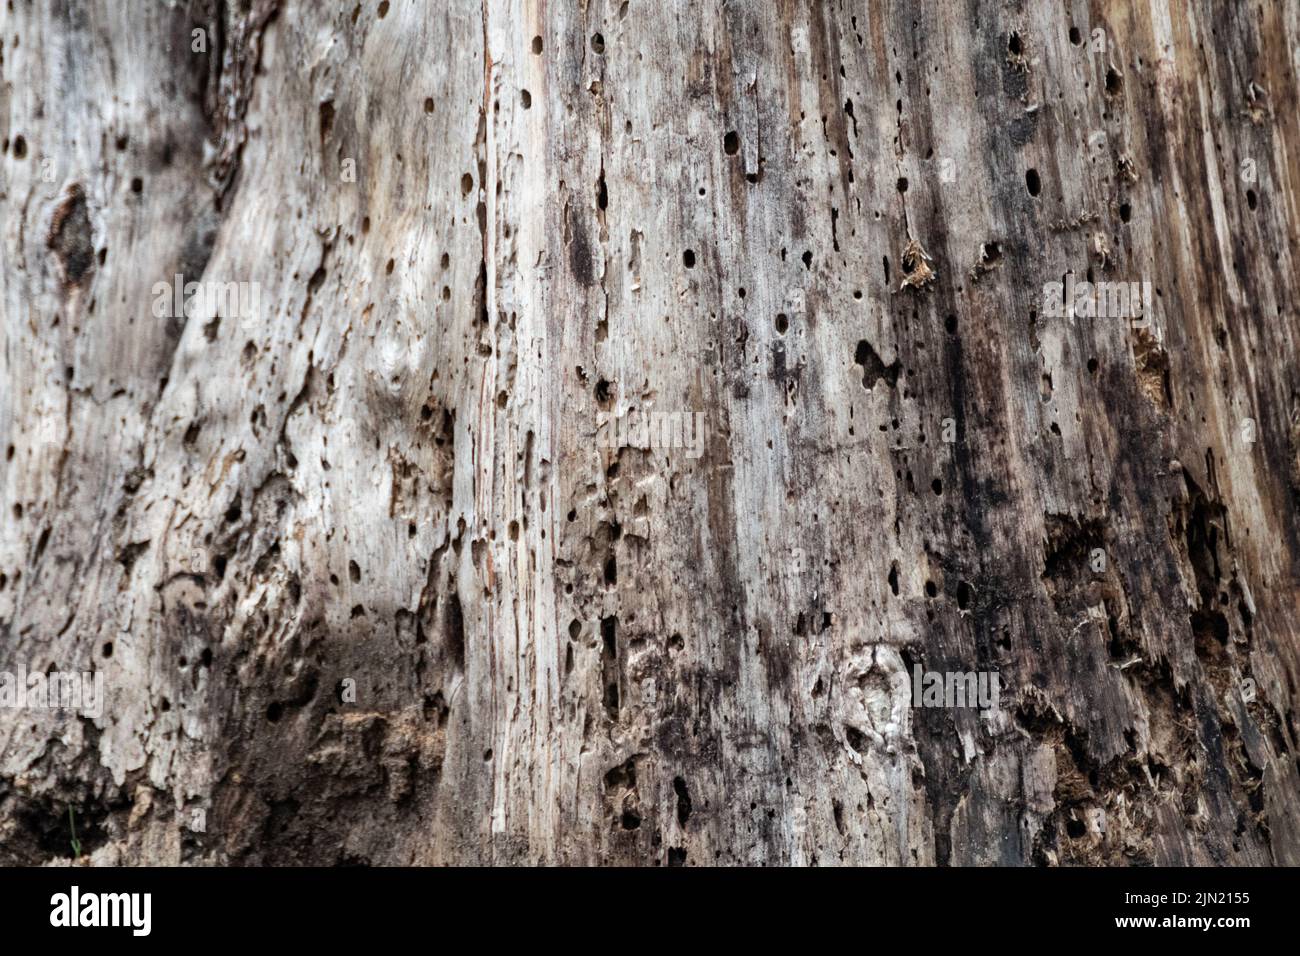 Tree trunk damaged, eaten by borer insects, close-up view. Tree with holes pattern, surface details Stock Photo